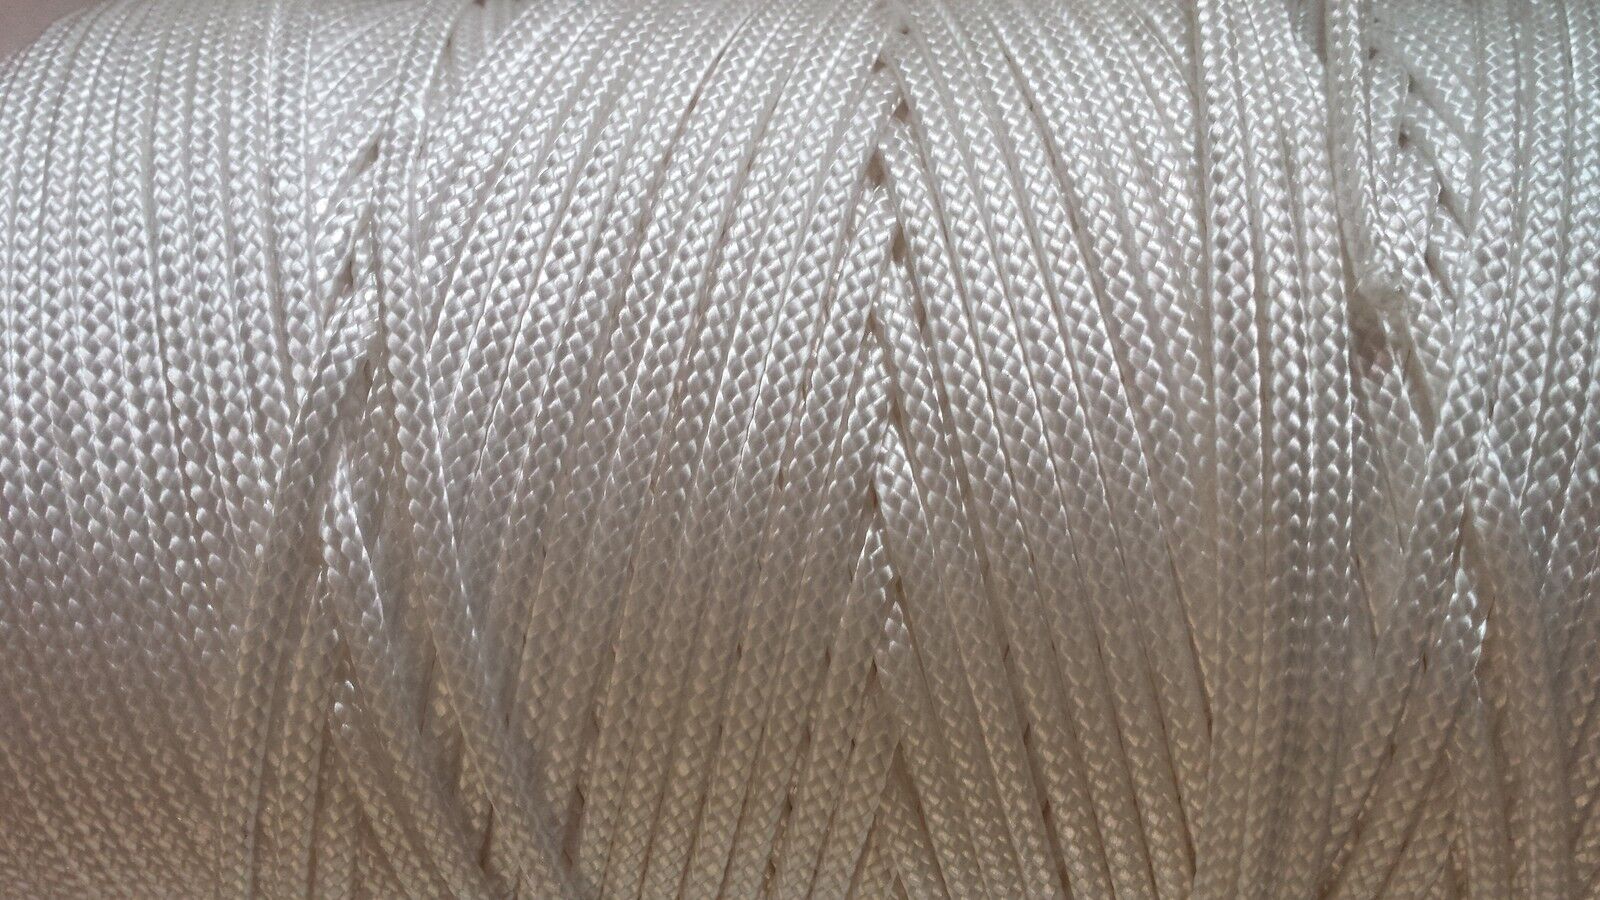 White Nylon Braided Cord Thread Twine (1.3mm 2mm 3mm 4mm and 6mm) x 20  Metres - More Than Just Ropes